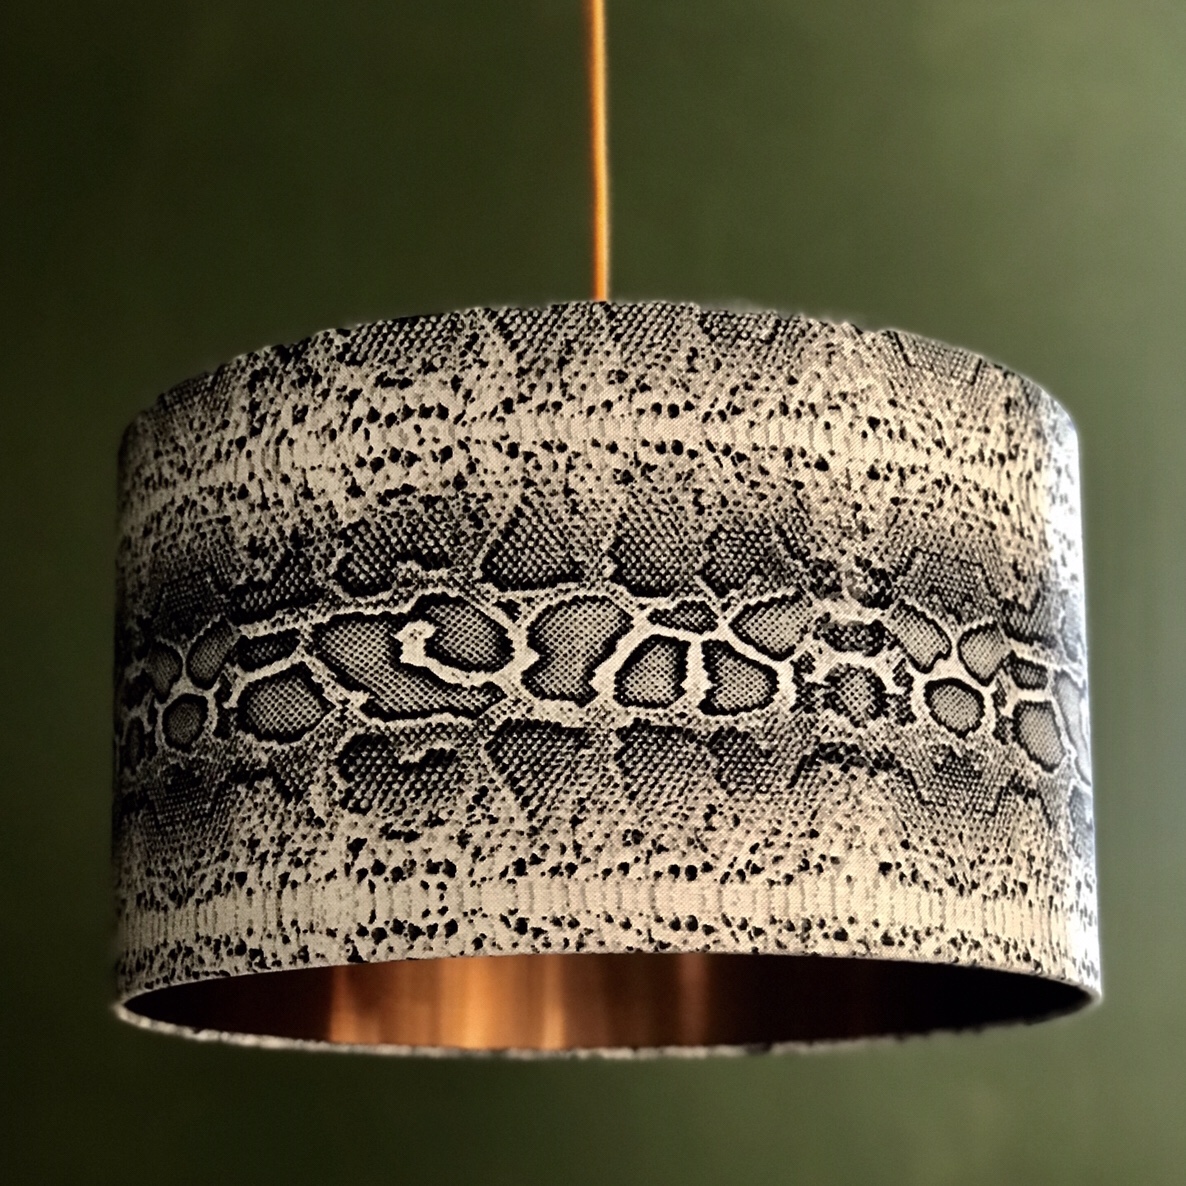 Serpent Snakeskin Linen Lampshade With, Leopard Print Lamp Shades Table Lamps